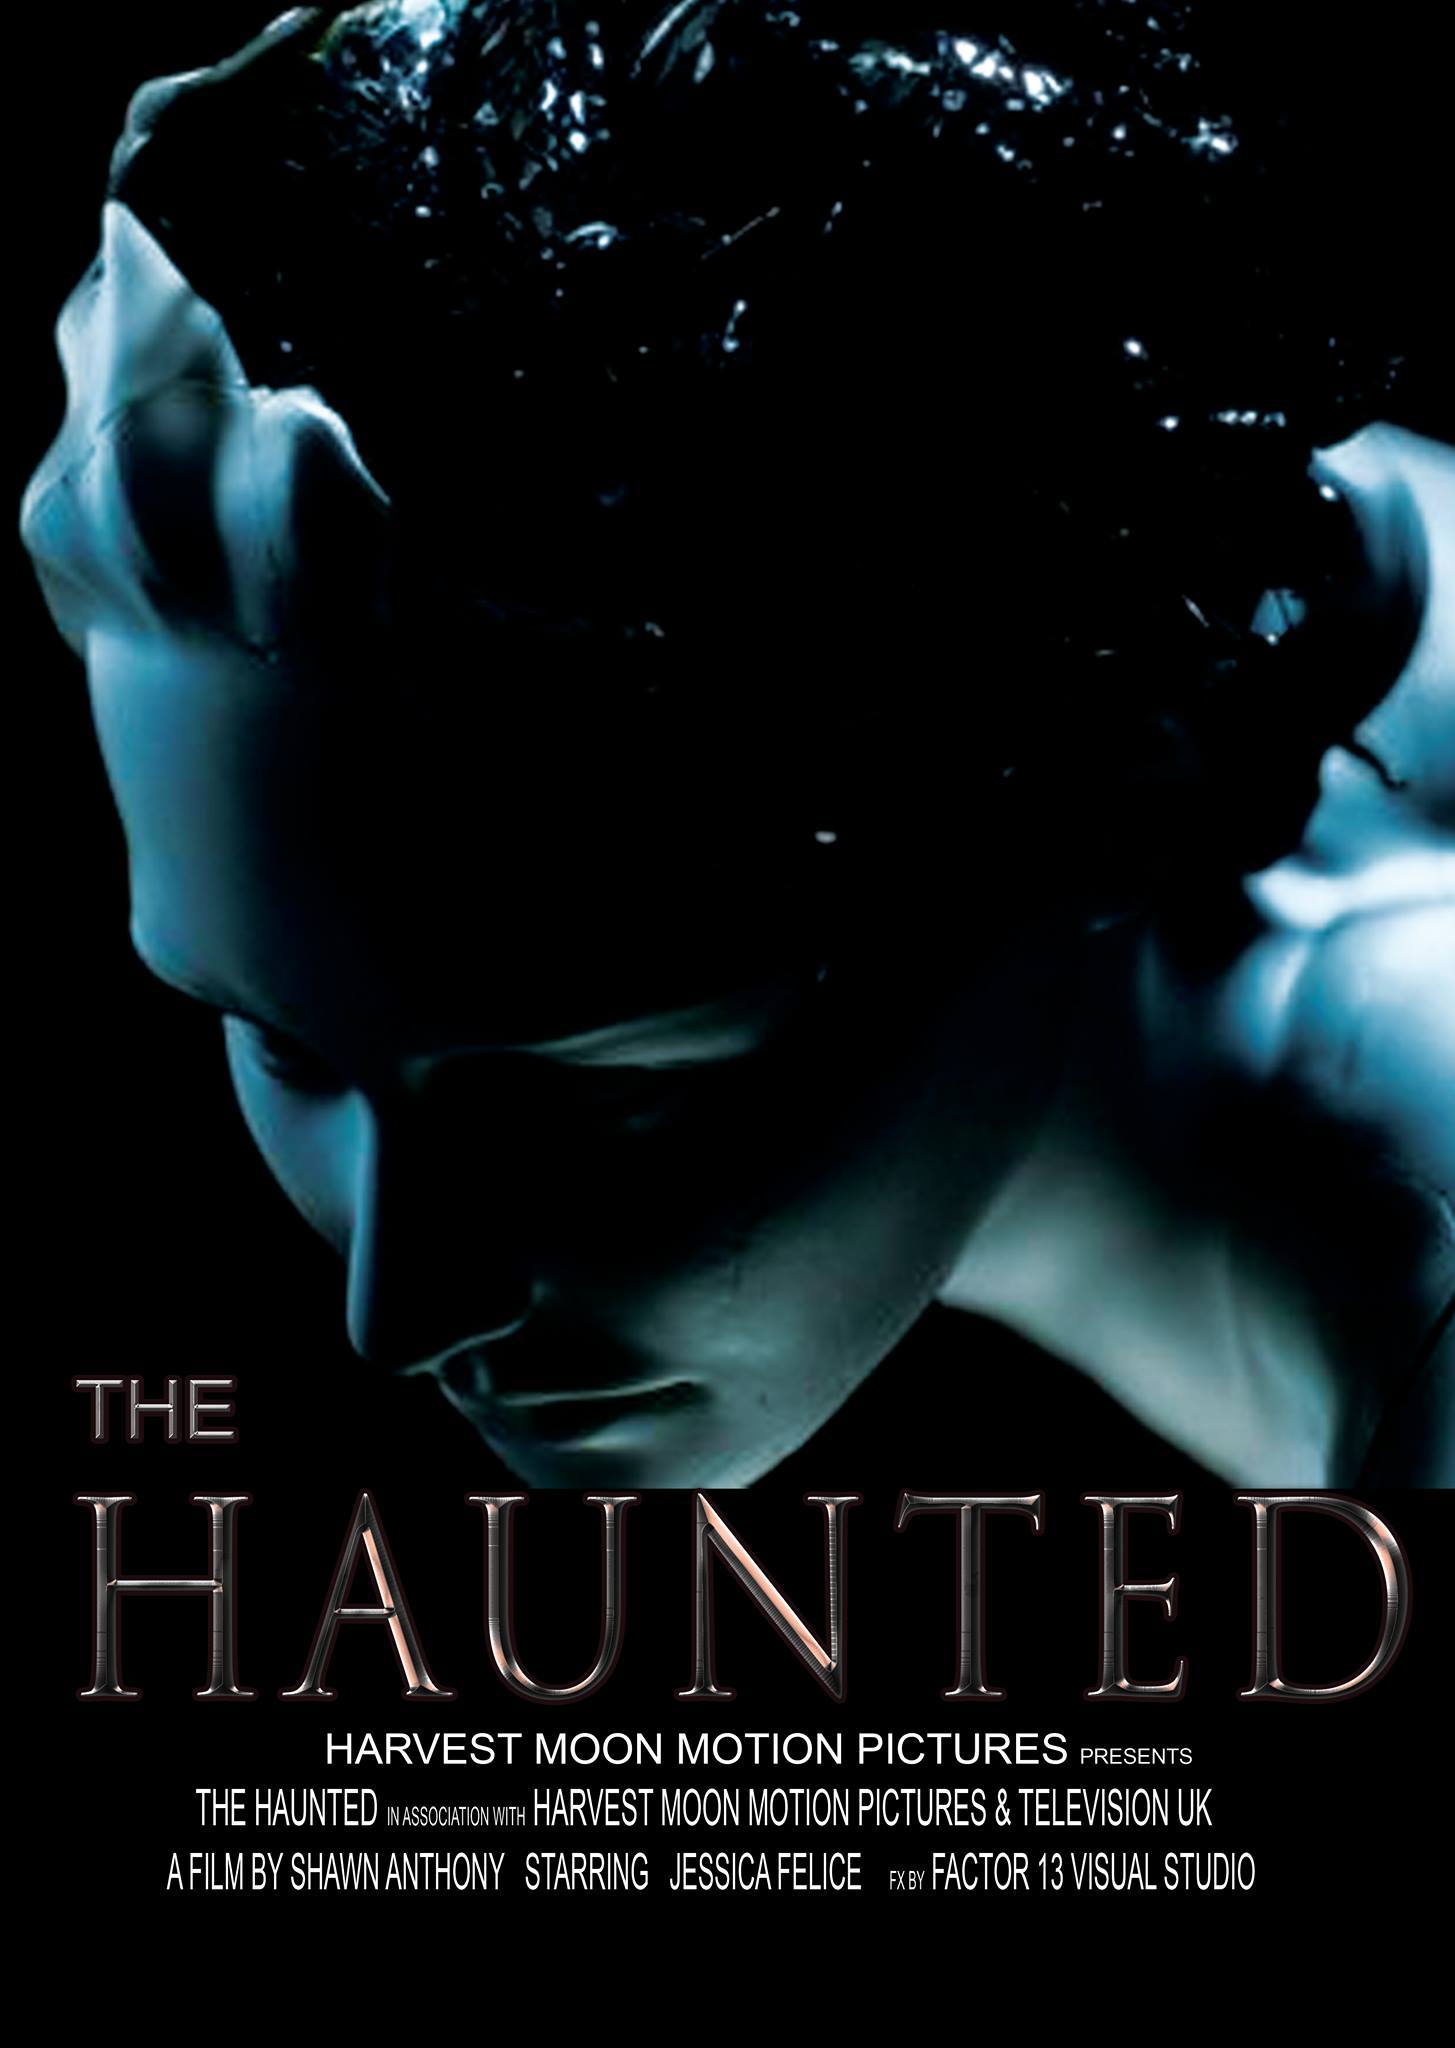 Something wicked this way comes... The Haunted